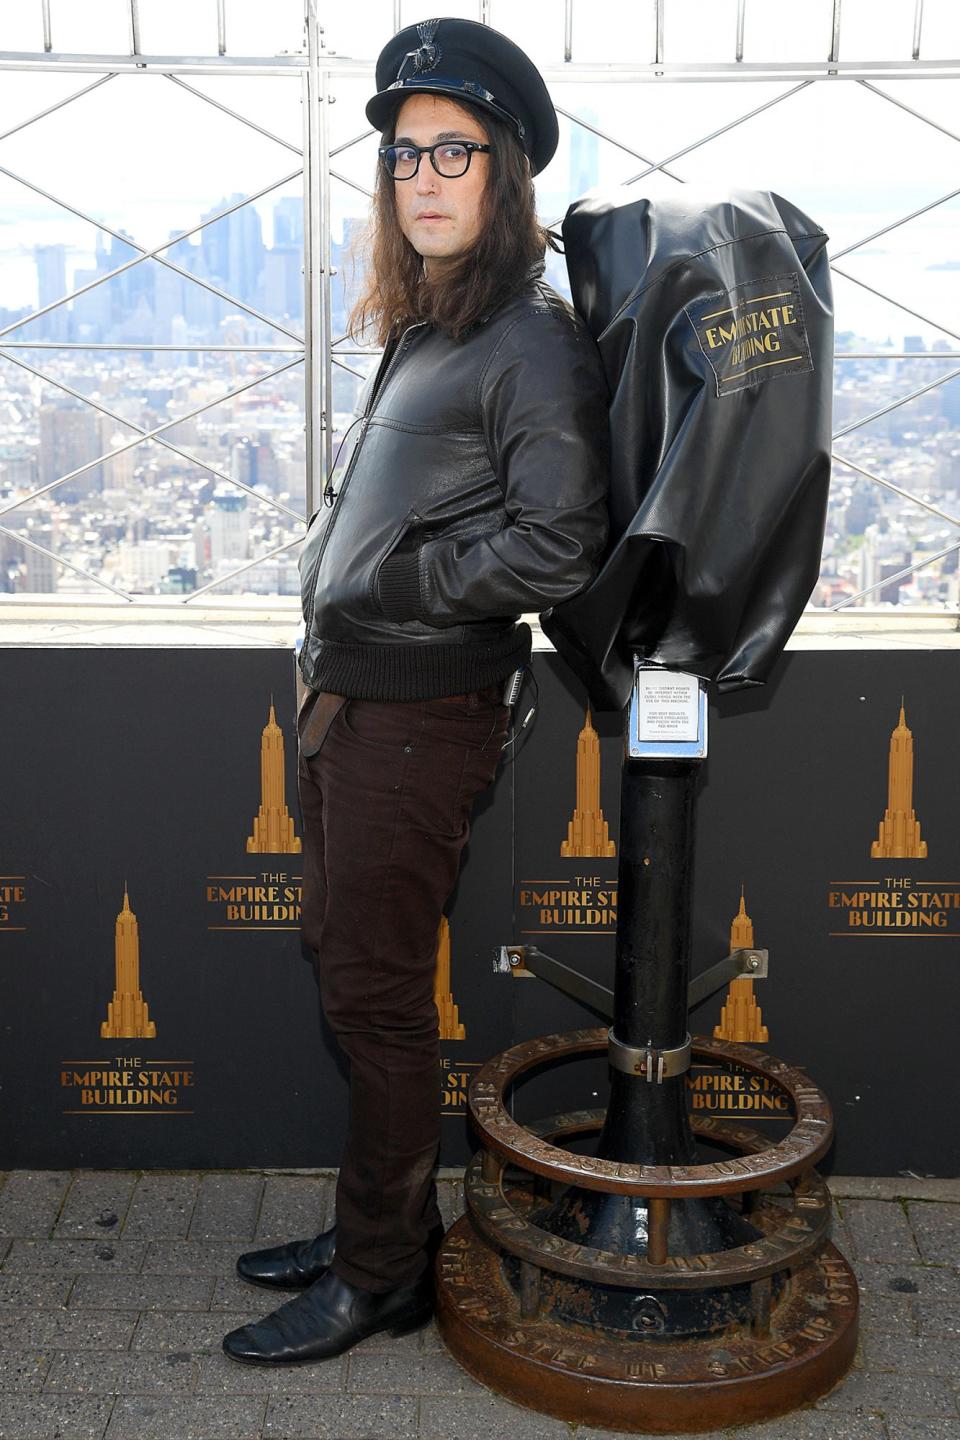 <p>Sean Ono Lennon attends the Empire State Building Lighting Ceremony in honor of his late dad John Lennon’s 80th birthday on Thursday in N.Y.C. </p>